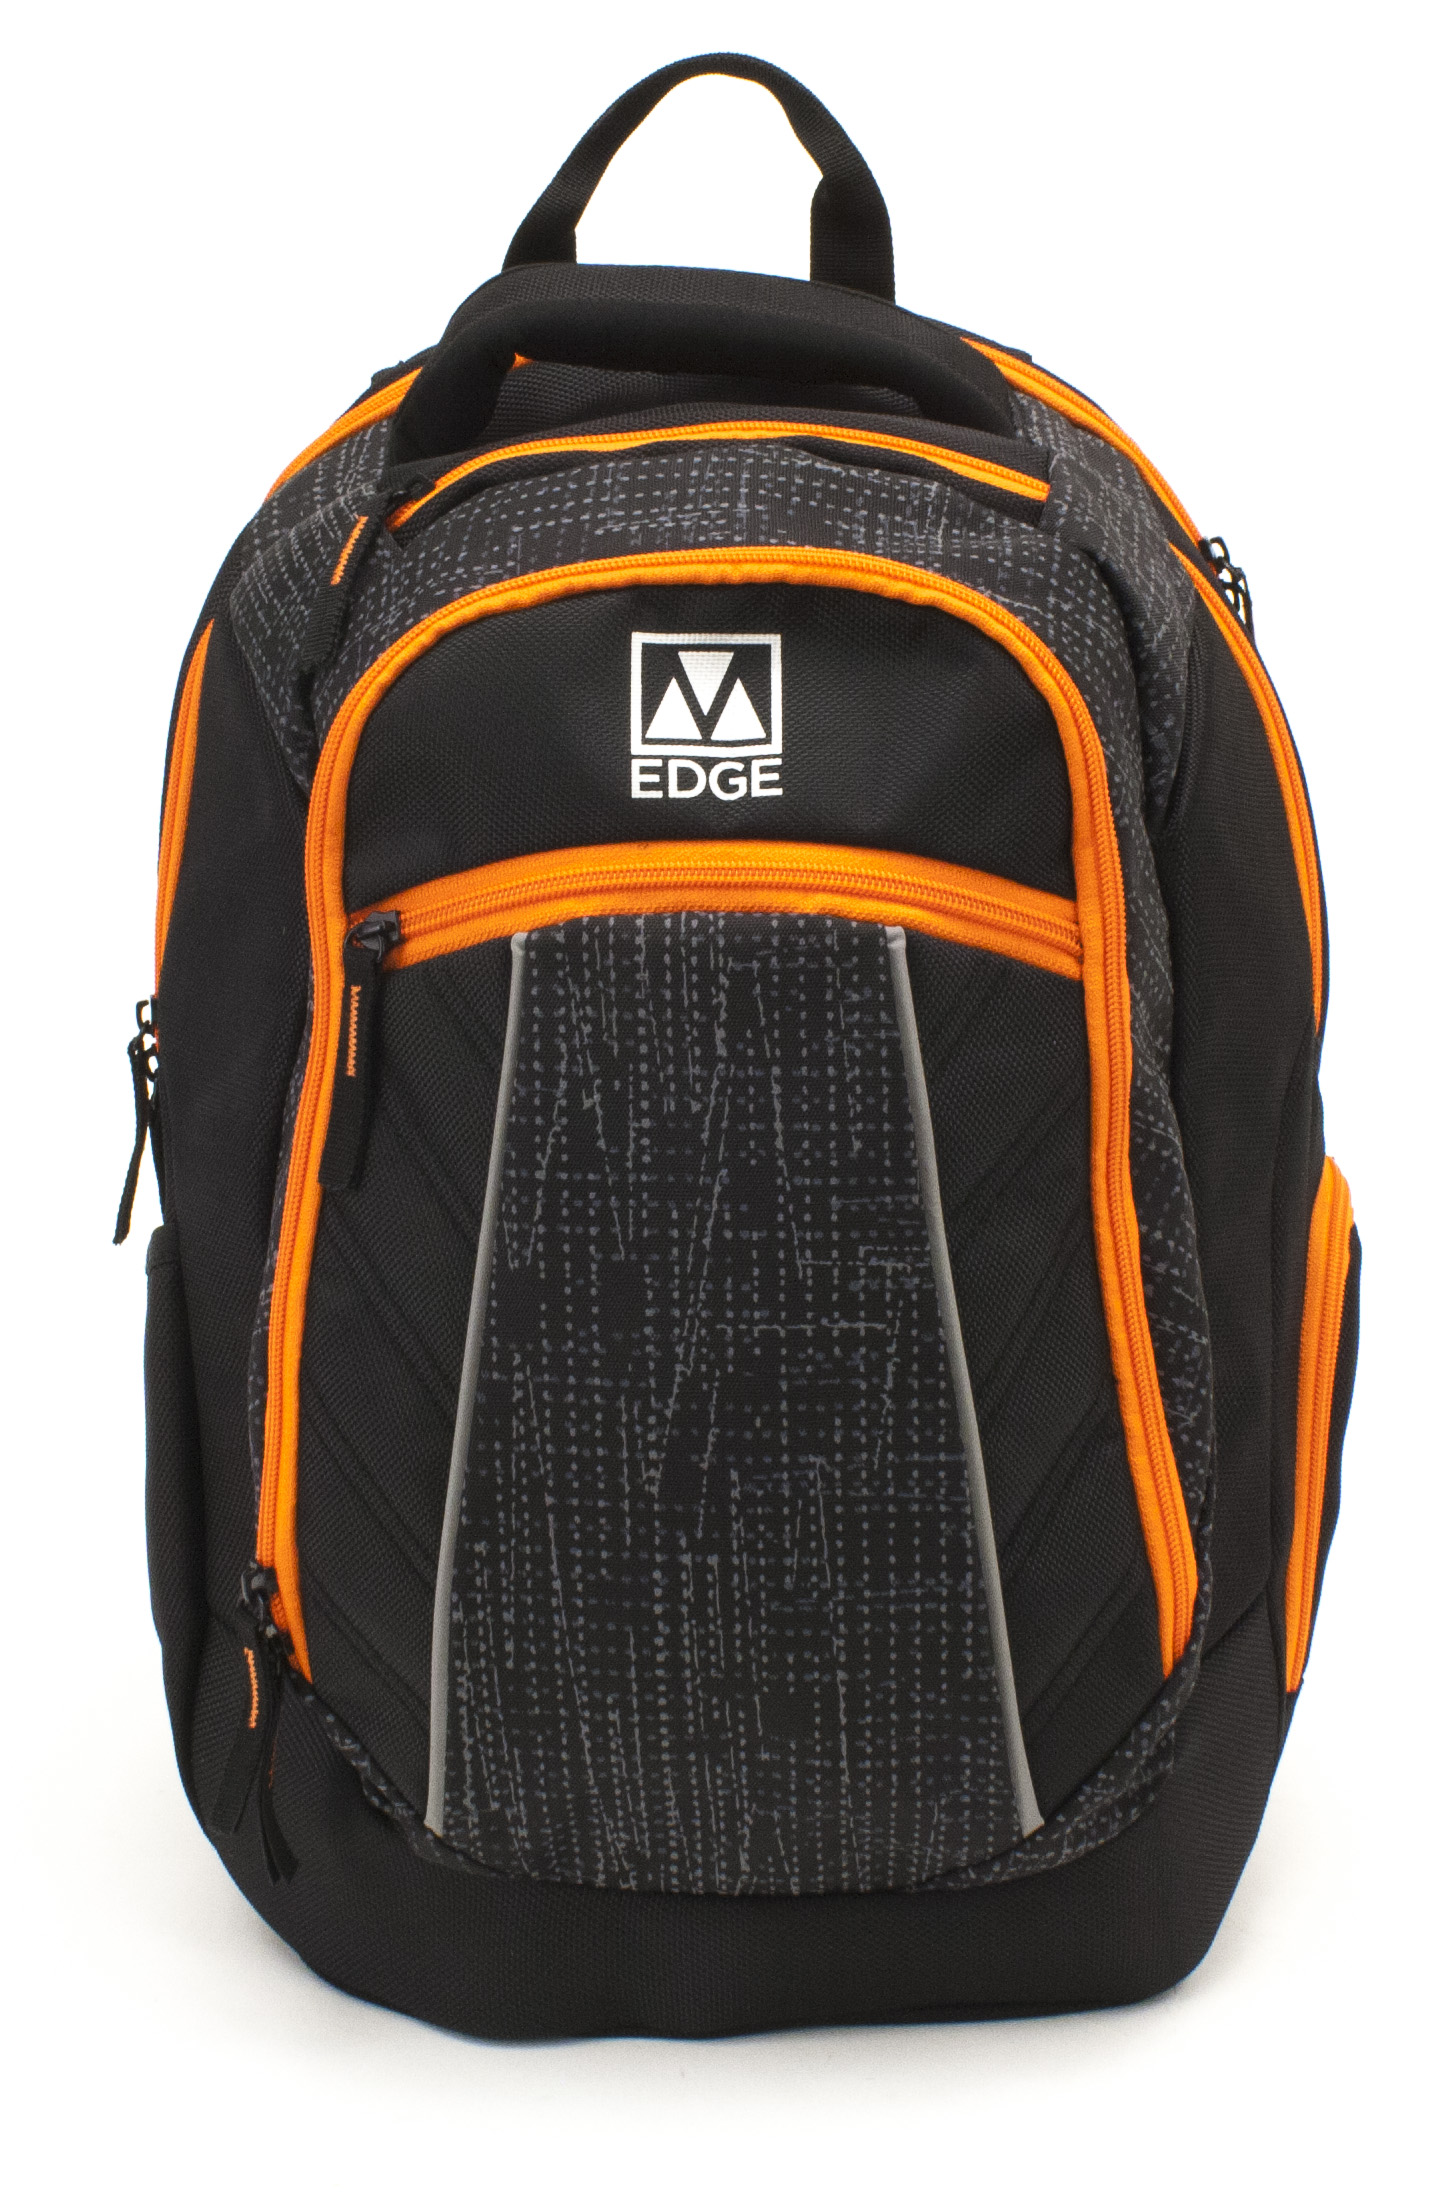 Commuter Backpack with 6000 mAh Battery by M-Edge International